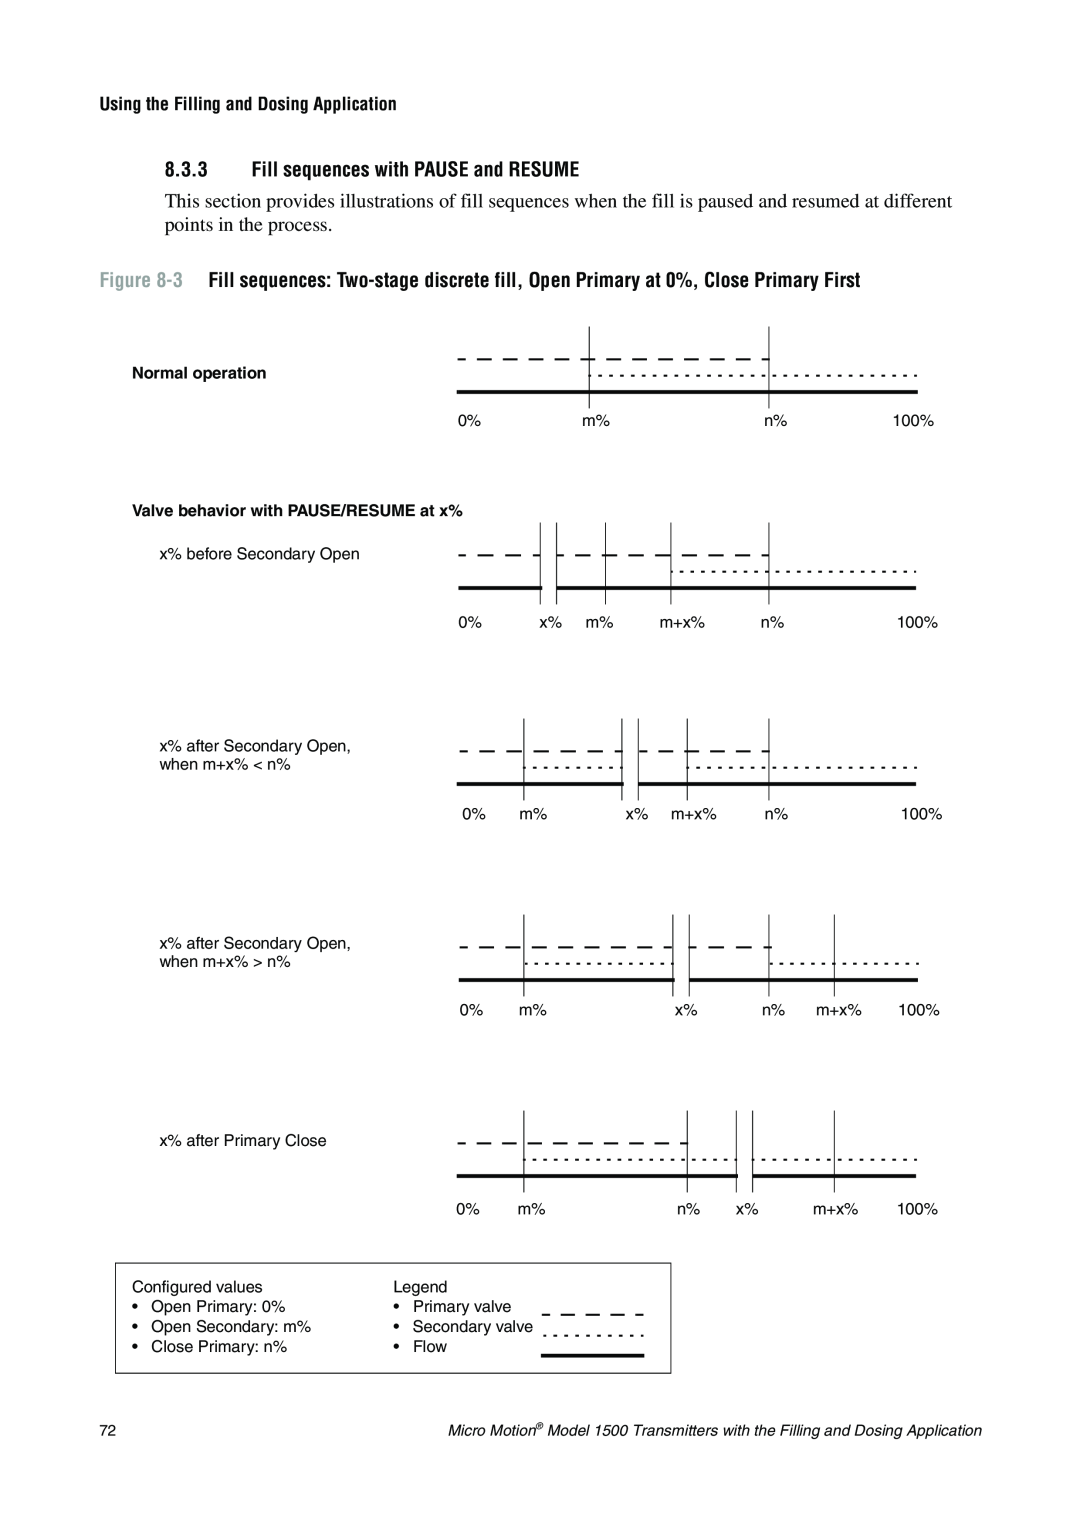 Emerson Process Management 1500 manual 8.3.3Fill sequences with PAUSE and RESUME, Using the Filling and Dosing Application 